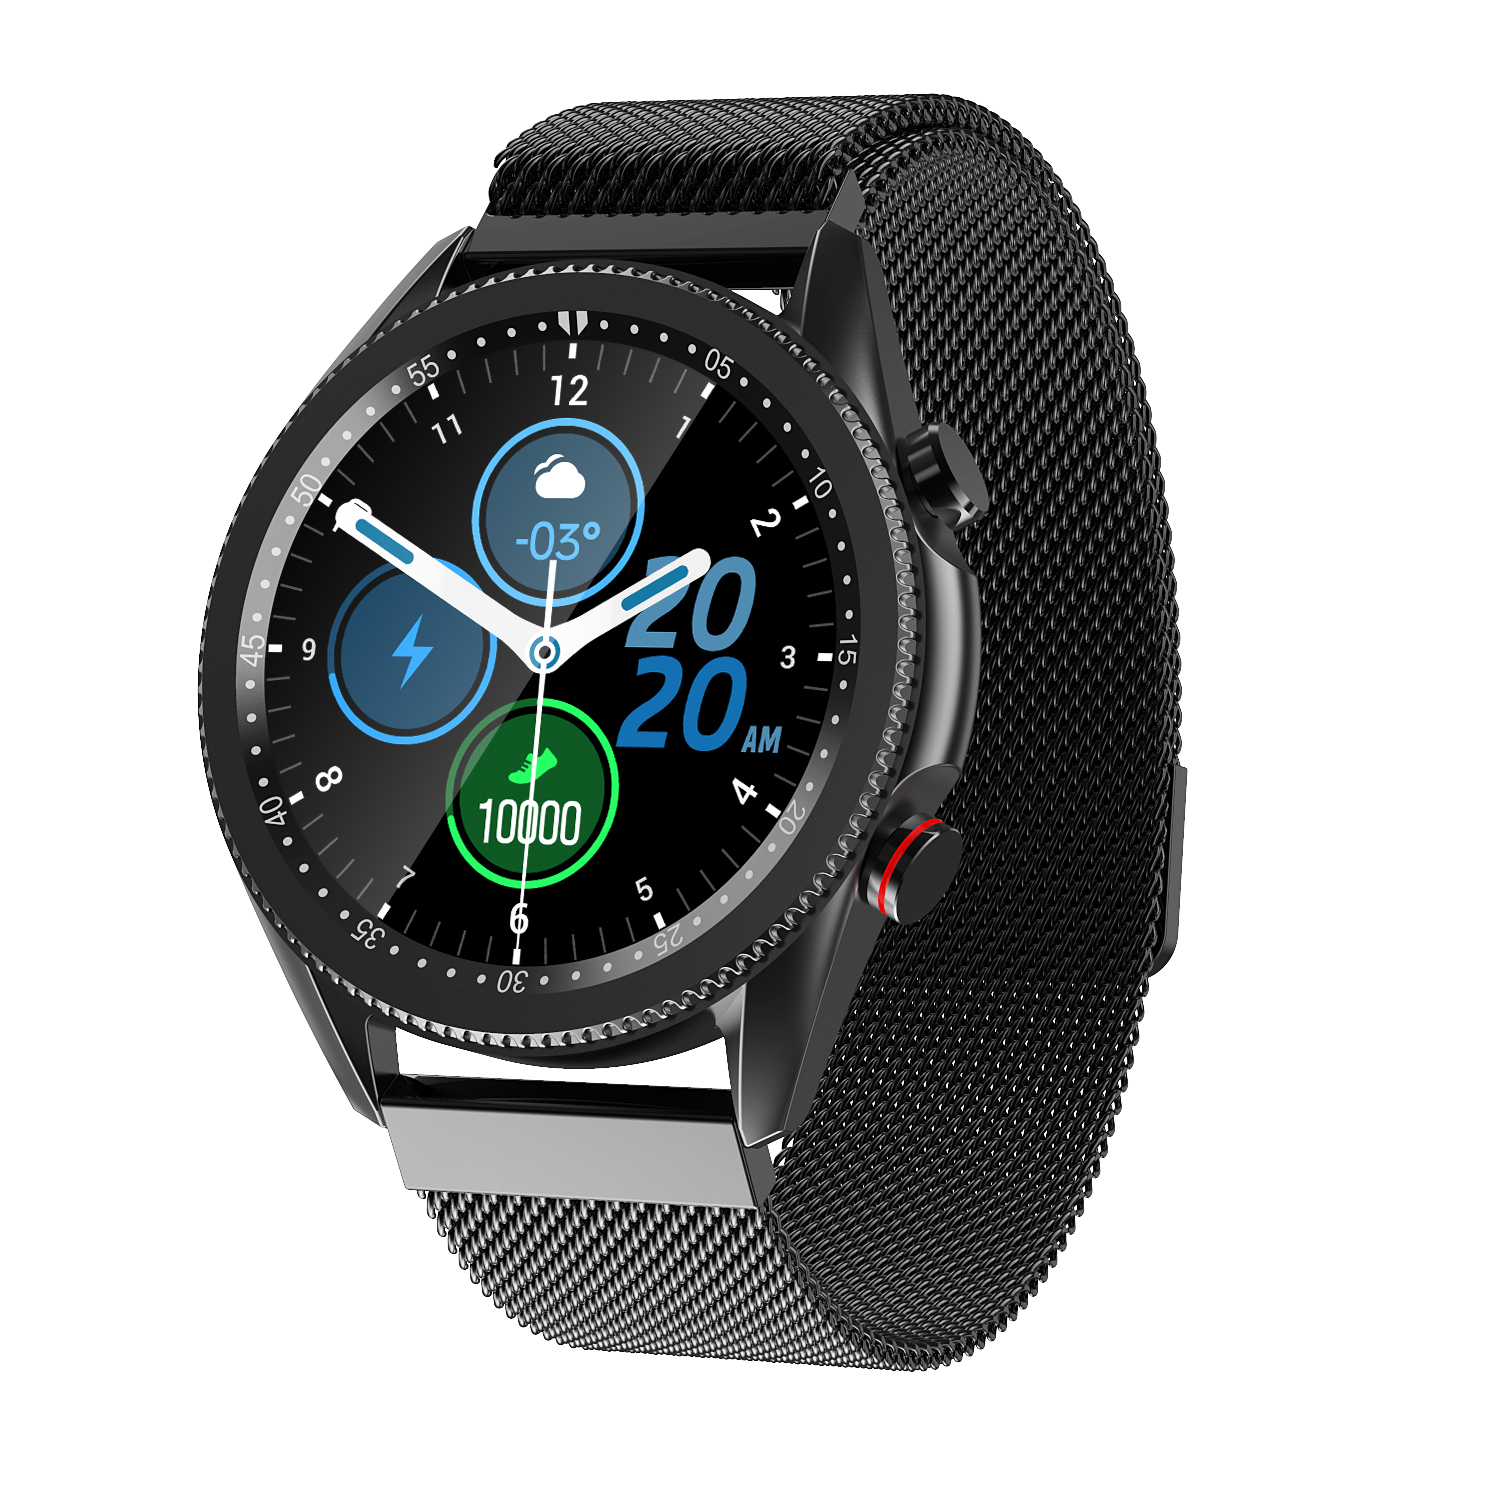 New Heart Rate Monitoring Smart Sport Watch with Music Control M98